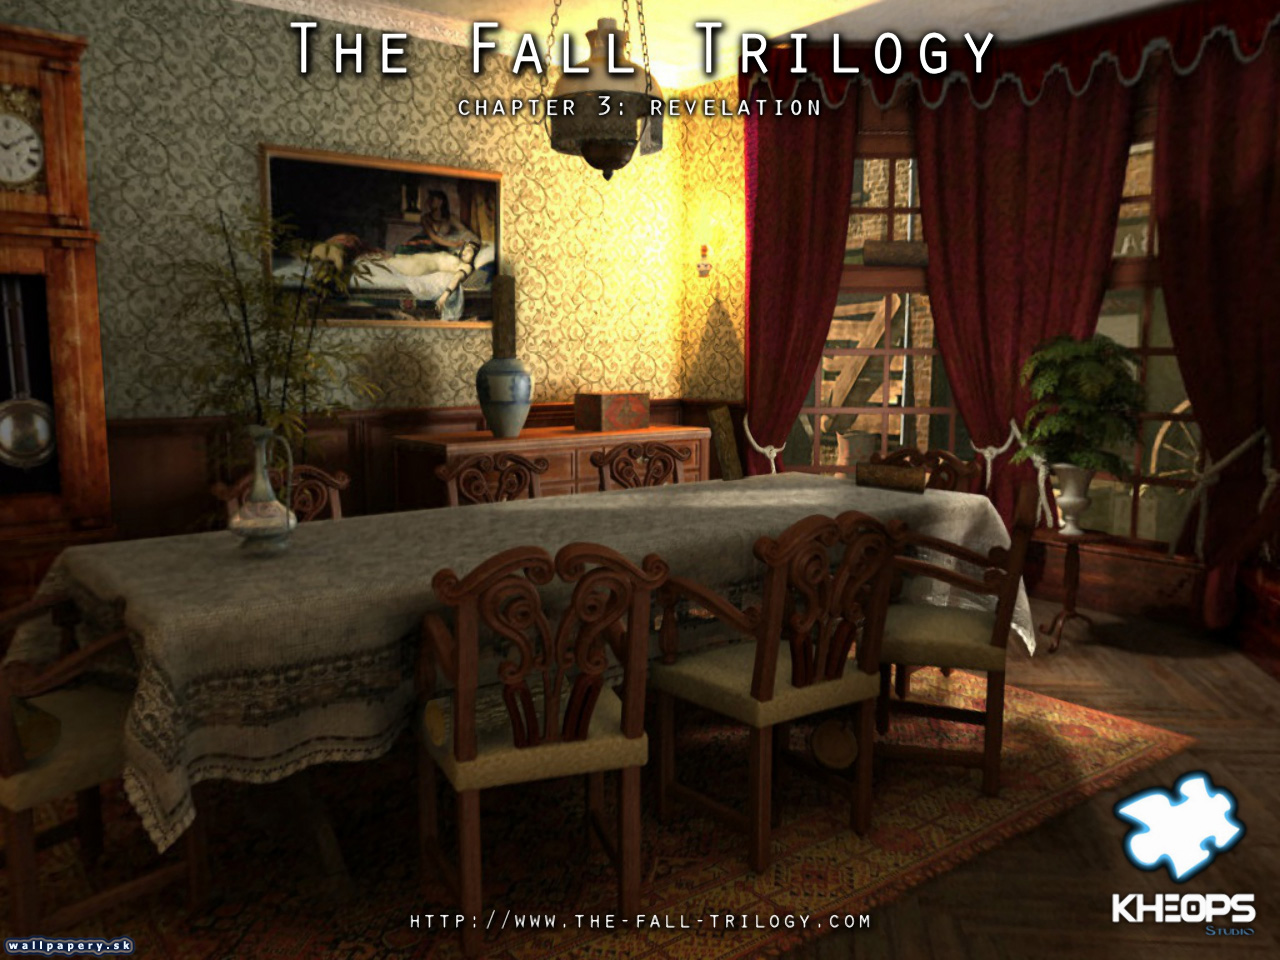 The Fall Trilogy - Chapter 3: Revelation - wallpaper 4